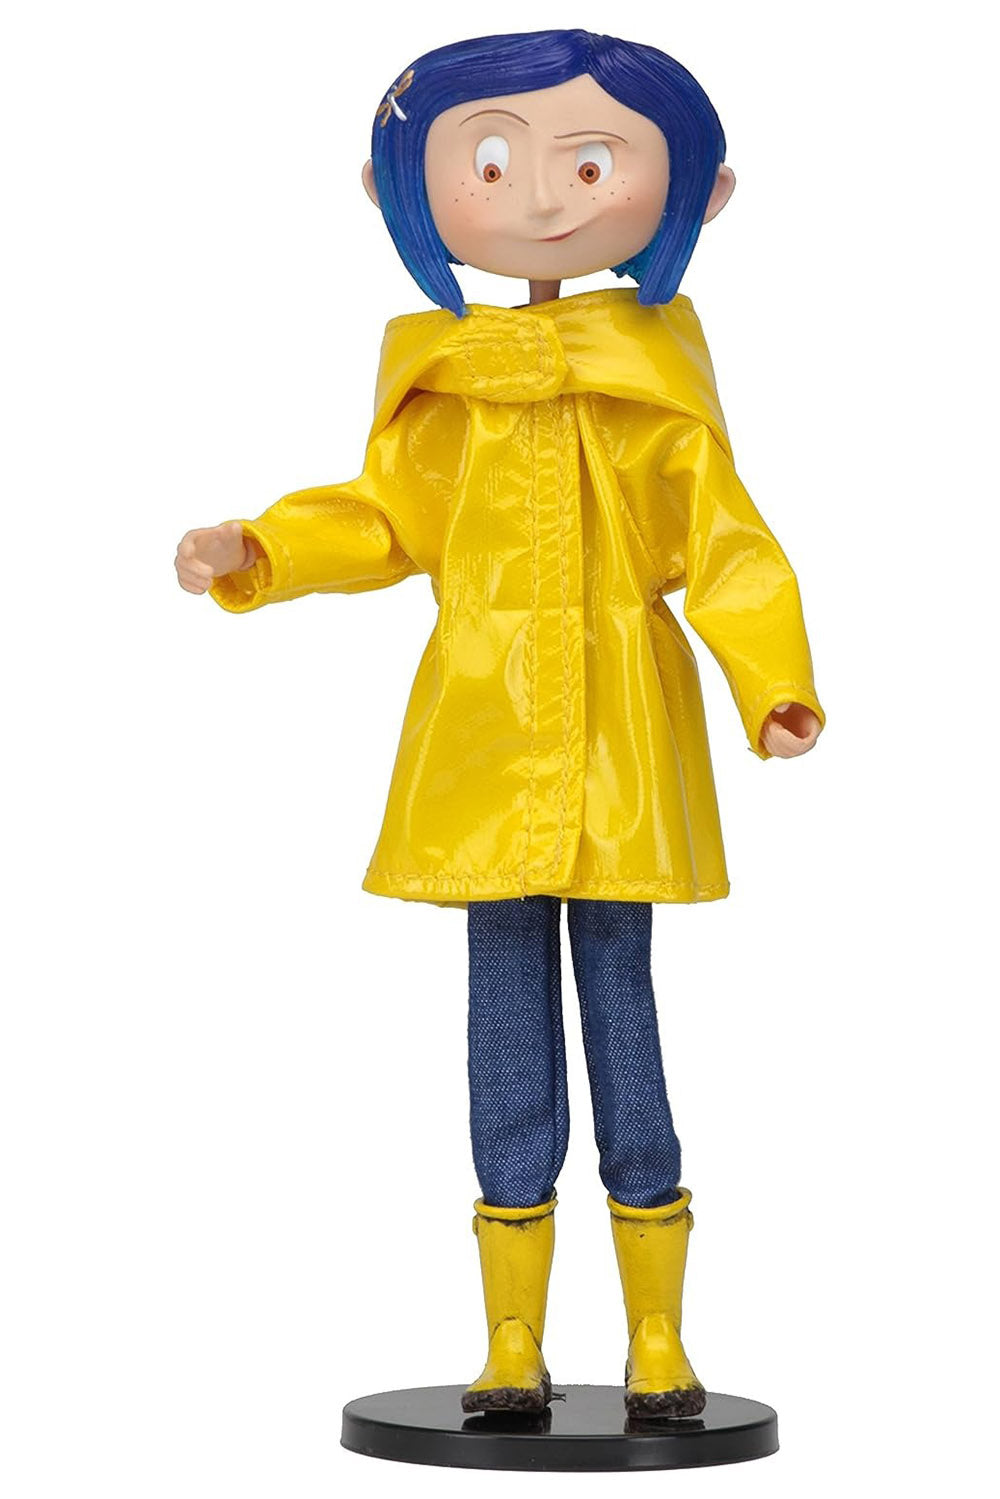 Posable Coraline Doll